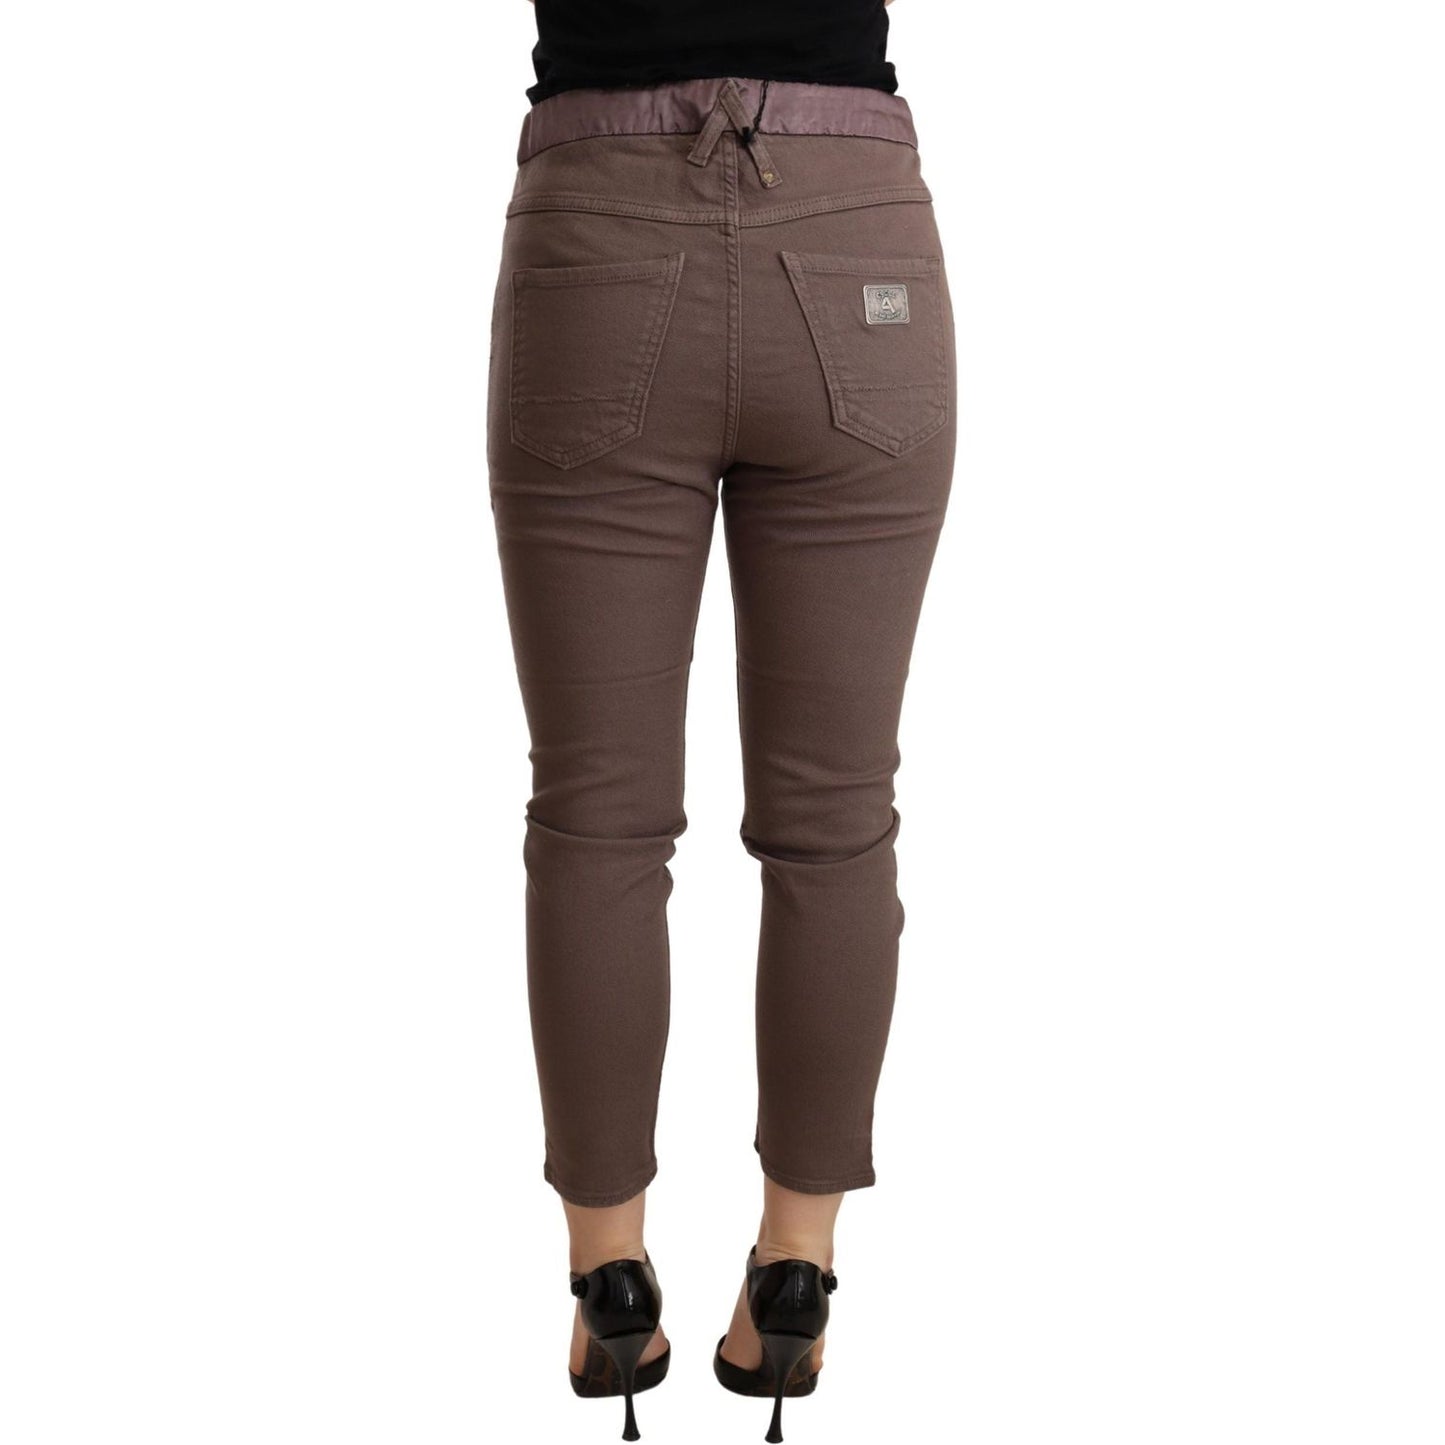 CYCLE Chic Brown Skinny Mid Waist Cropped Pants WOMAN TROUSERS brown-mid-waist-cropped-skinny-stretch-trouser